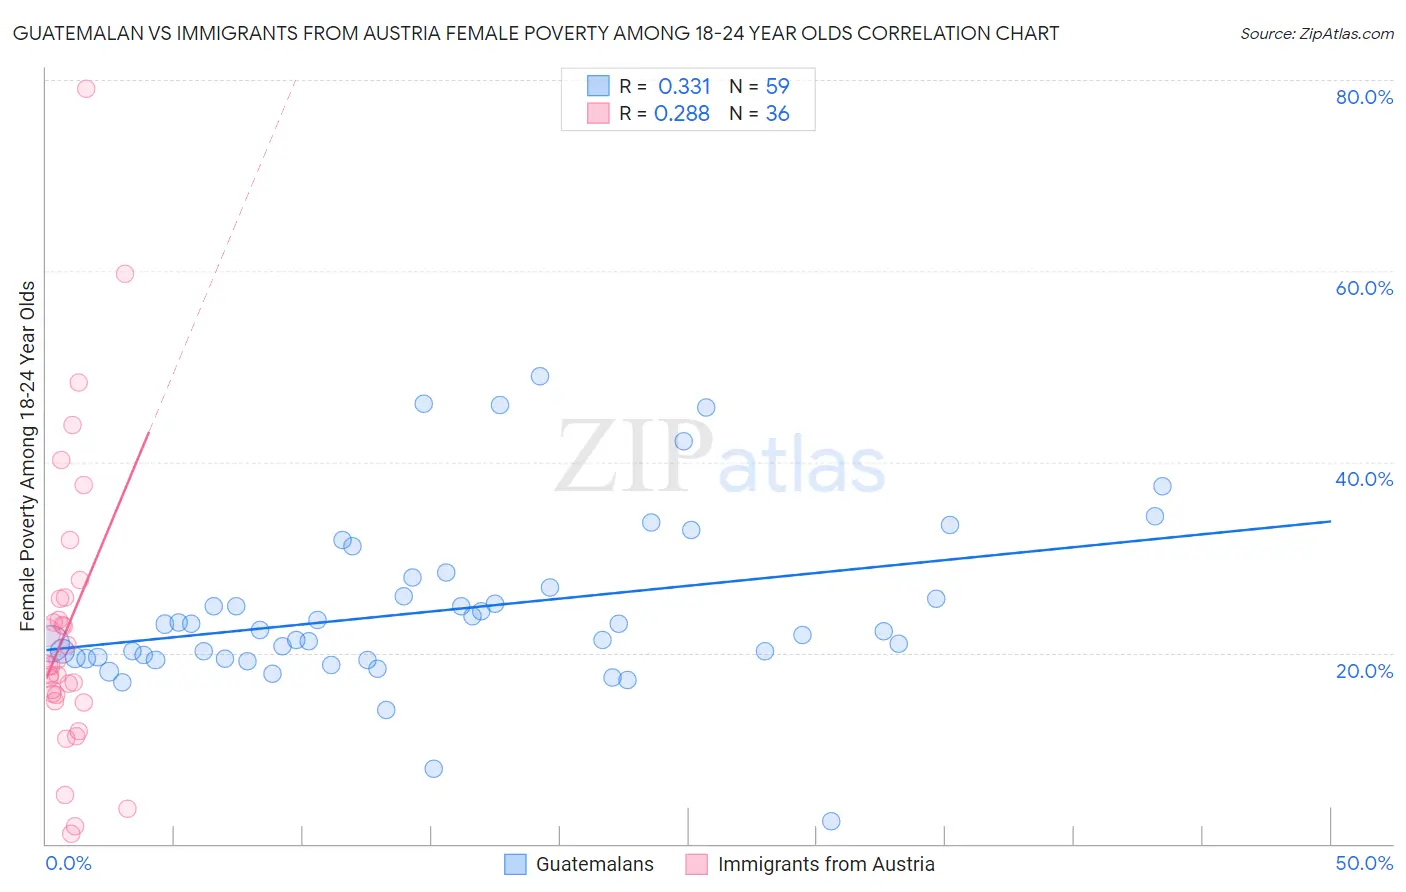 Guatemalan vs Immigrants from Austria Female Poverty Among 18-24 Year Olds